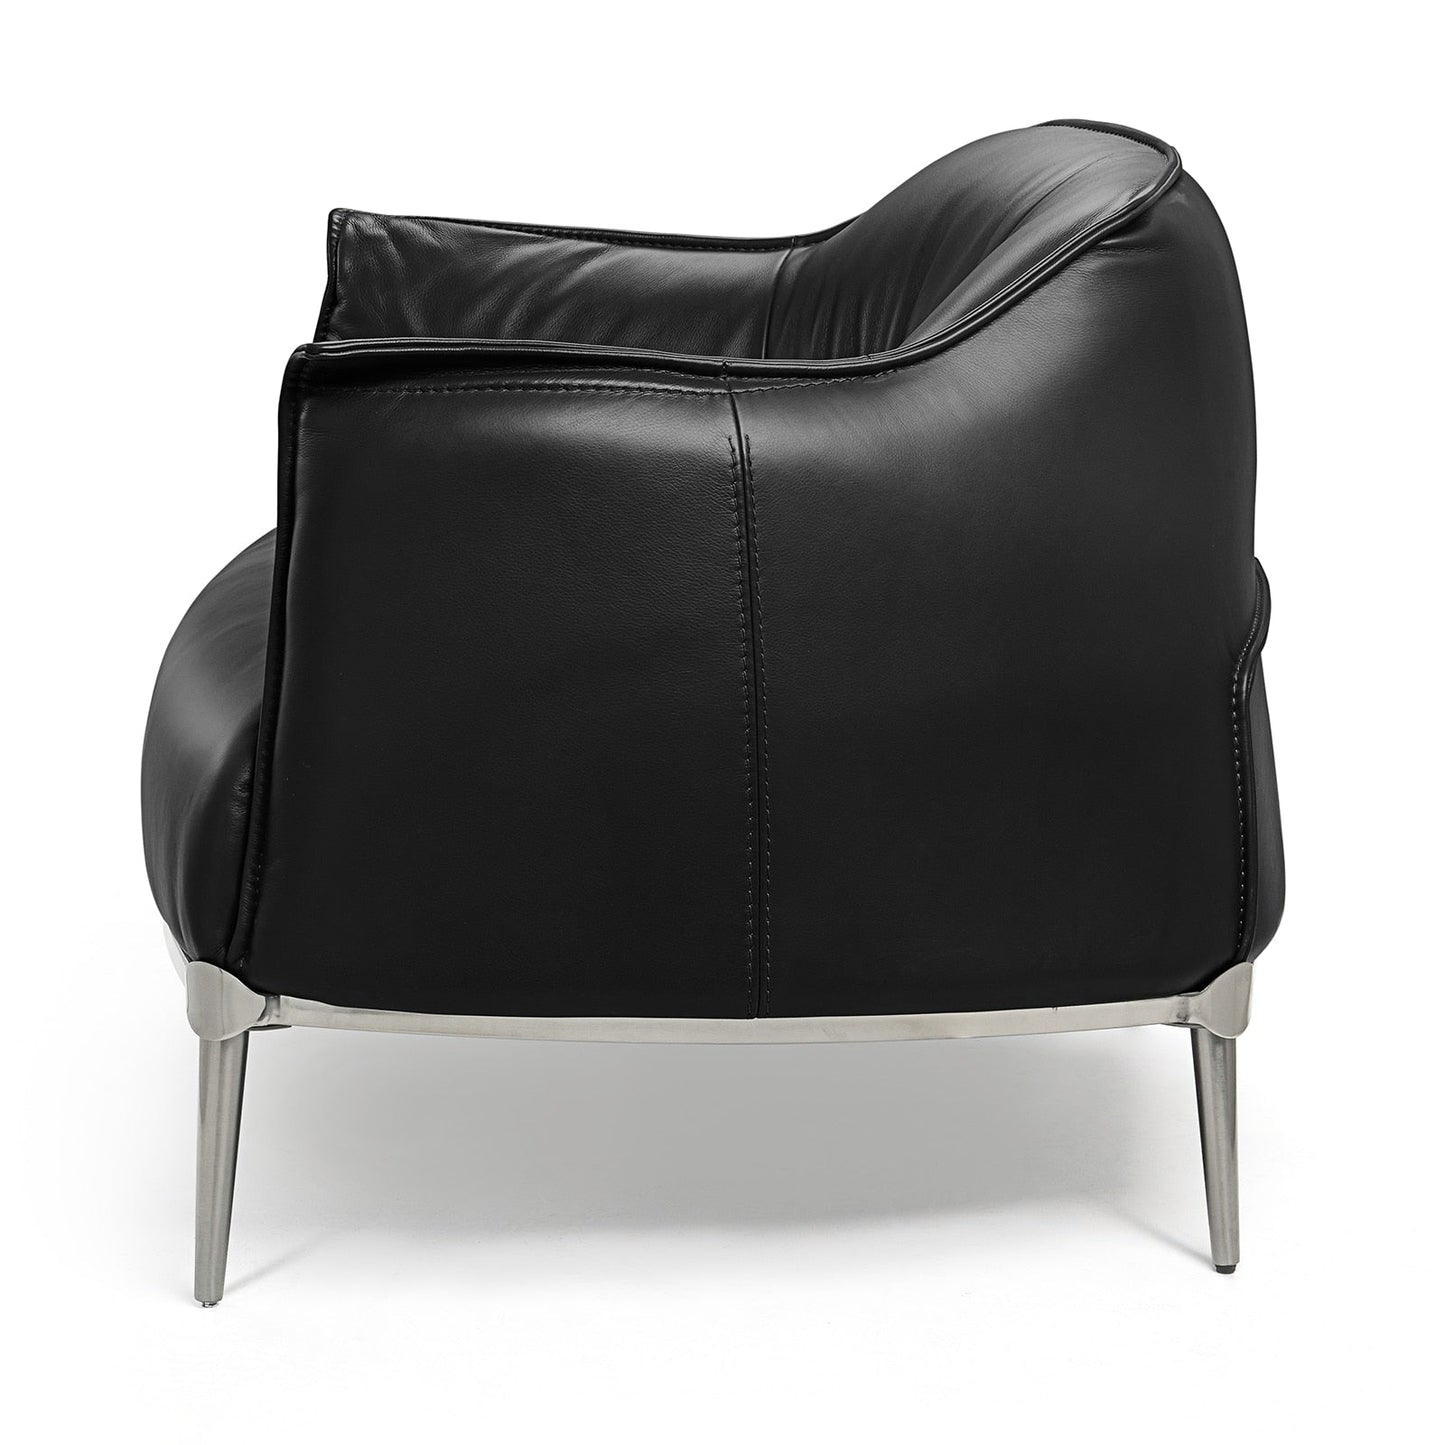 Arthia Designs - ARCHIBALD Leather Armchair by Jean-Marie Massaud - Review